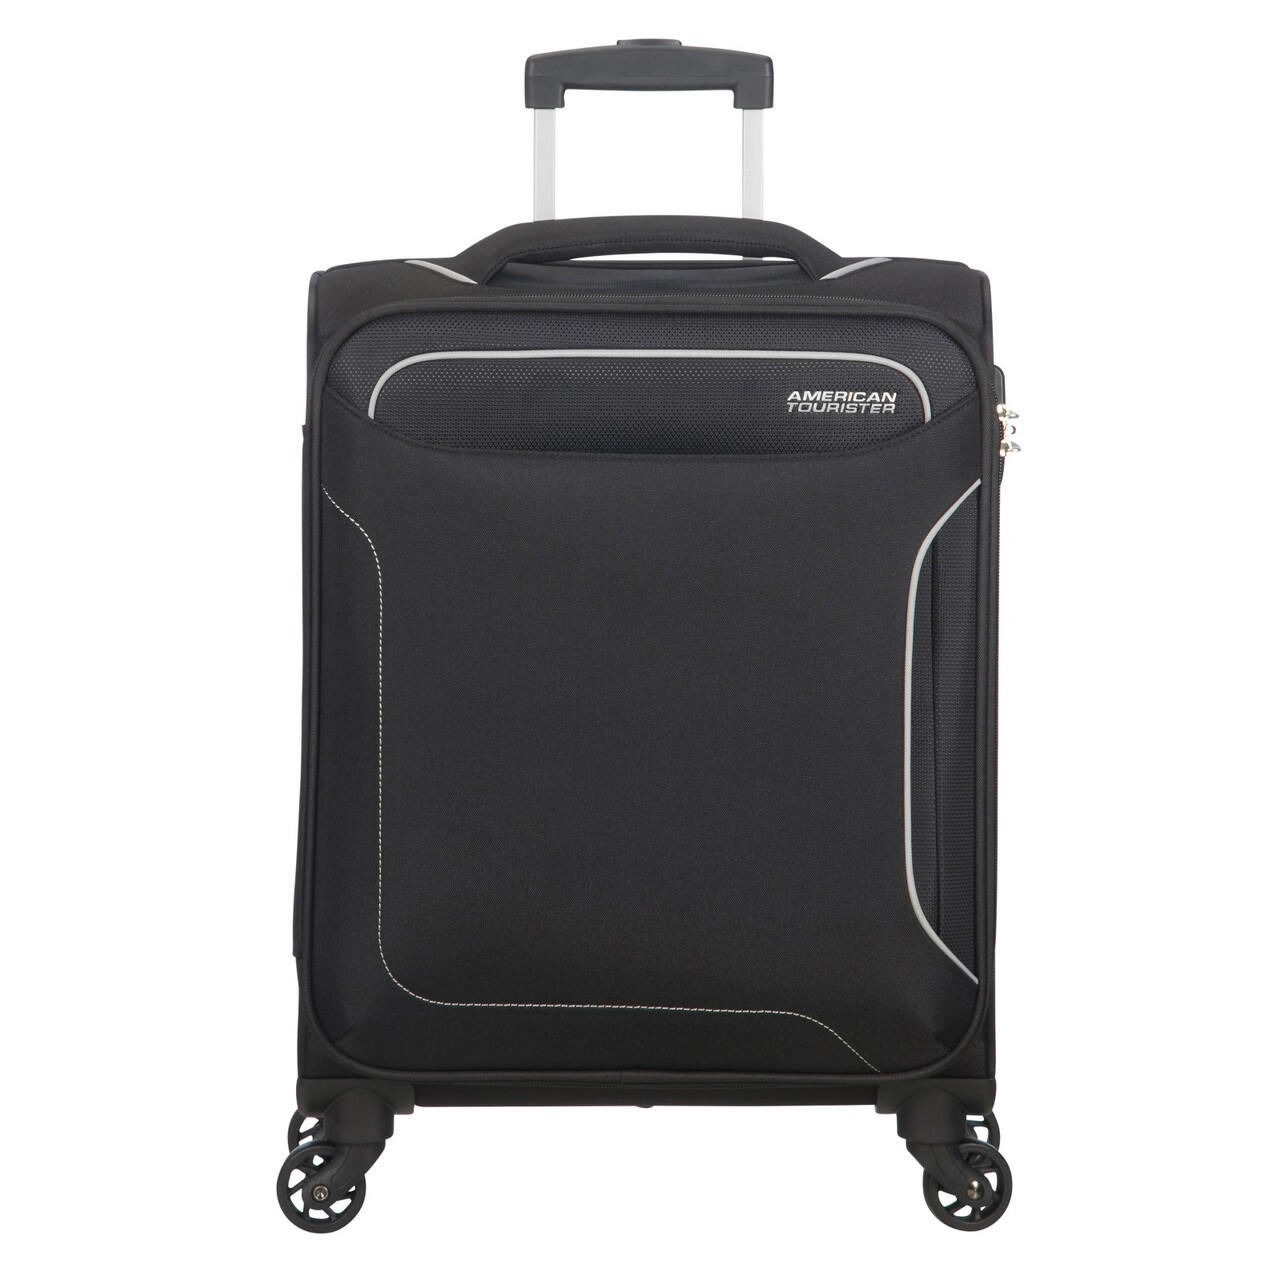 AMERICAN TOURISTER Holiday Heat 4 Wheel Cabin Suitcase - Black